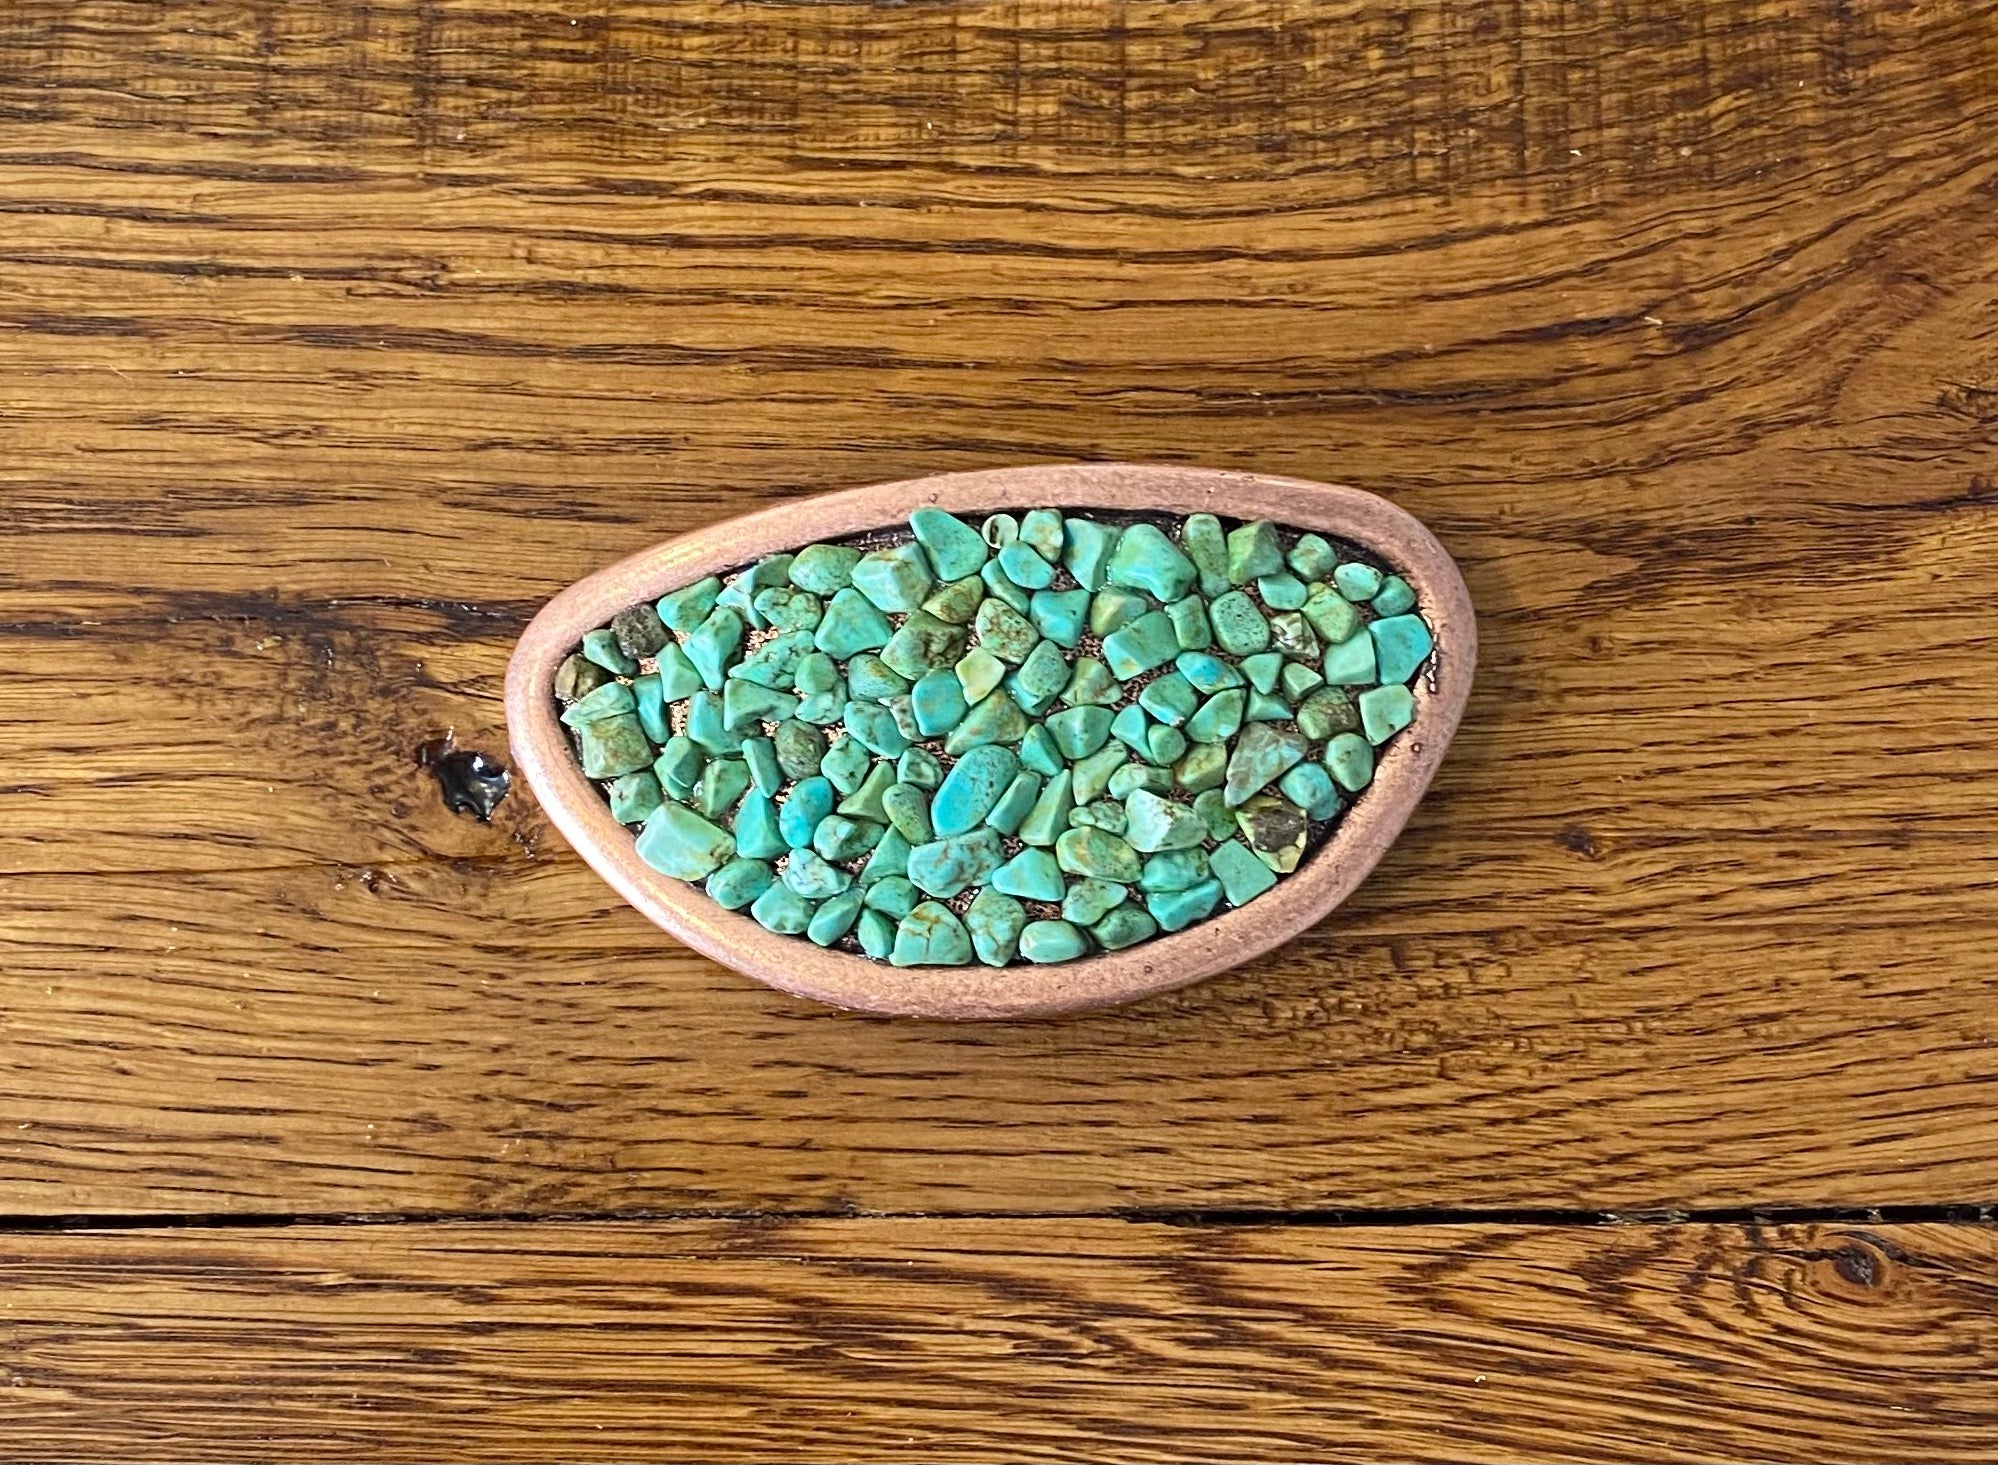 Copper and turquoise belt buckle